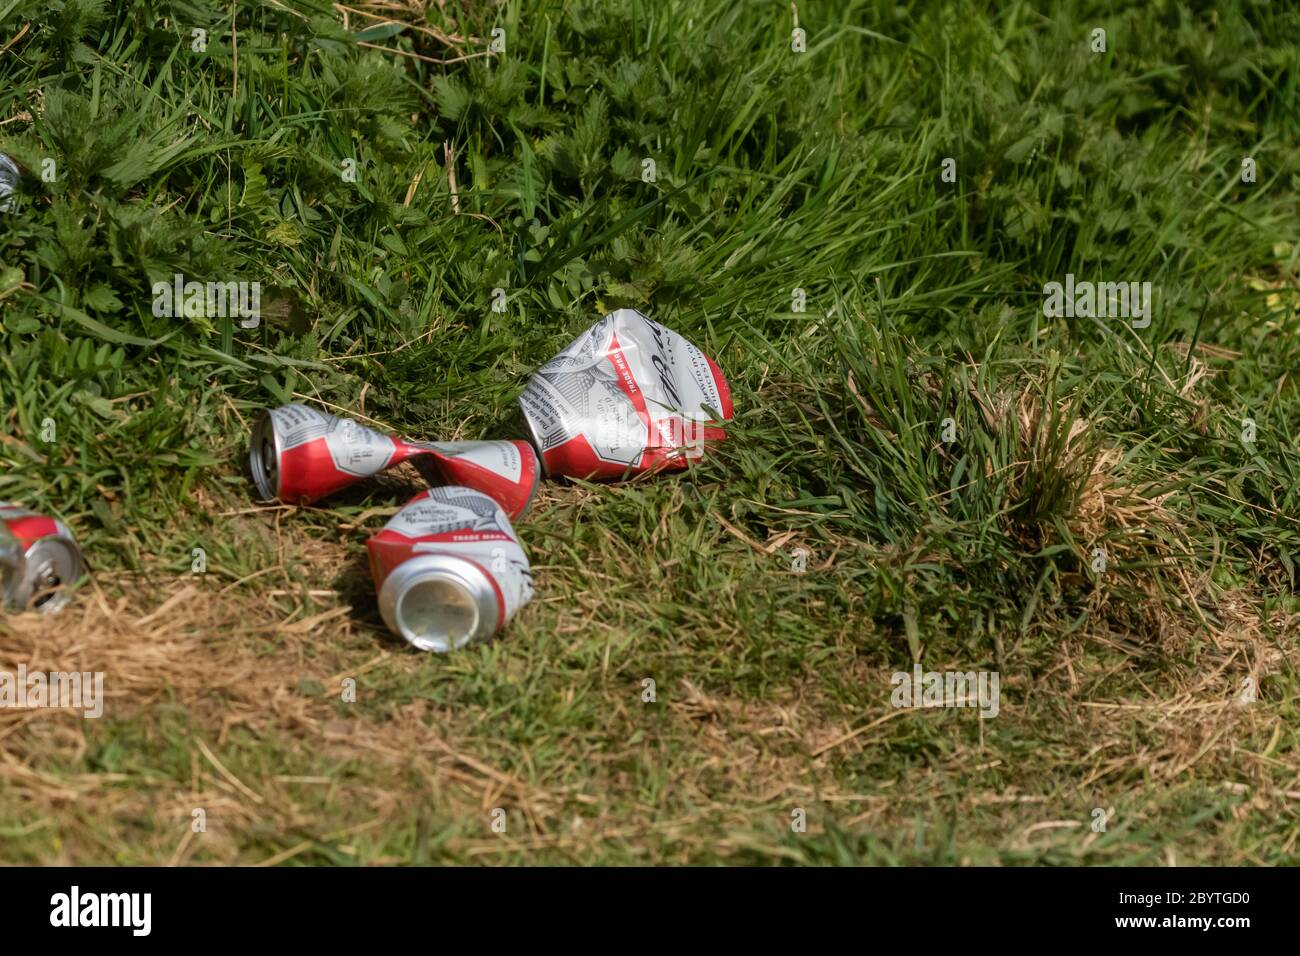 Squashed drink cans left on the grass as litter. Stock Photo